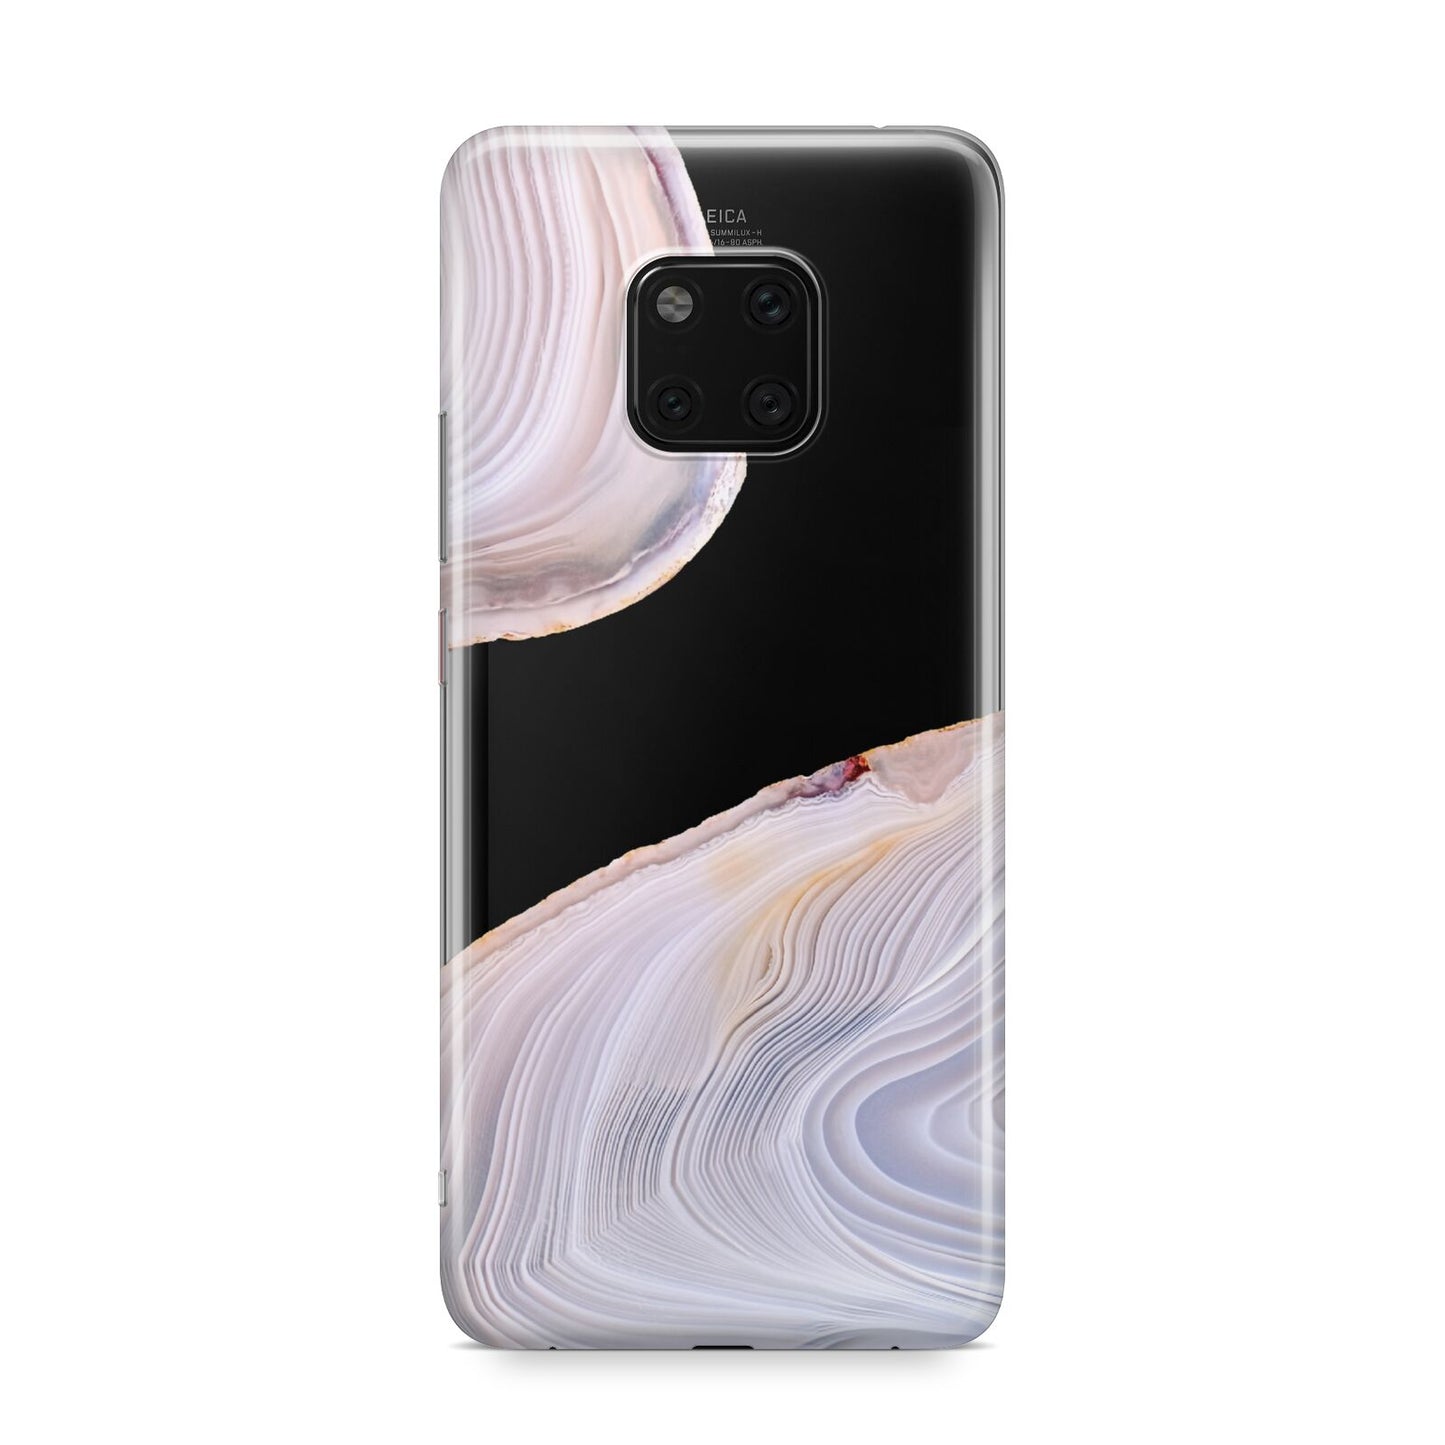 Agate Pale Pink and Blue Huawei Mate 20 Pro Phone Case